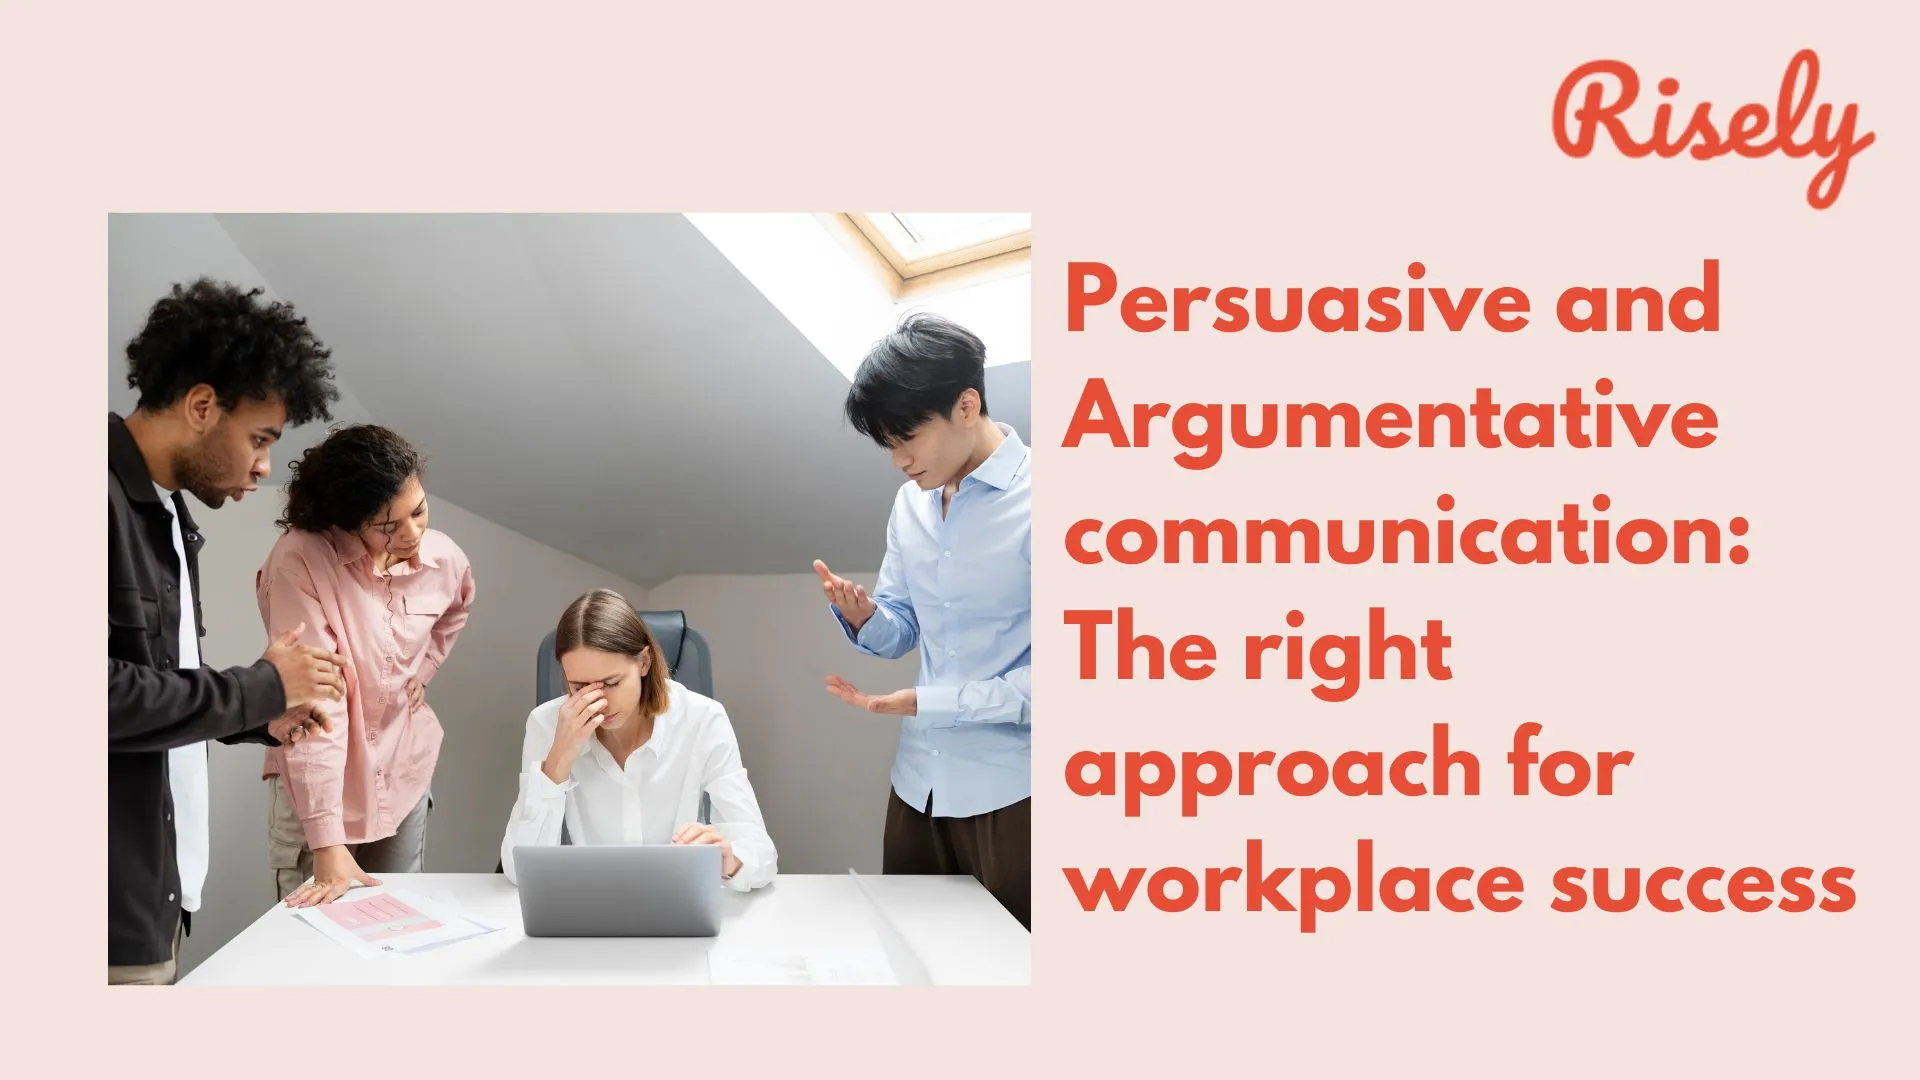 Persuasive and Argumentative communication: The right approach for workplace success